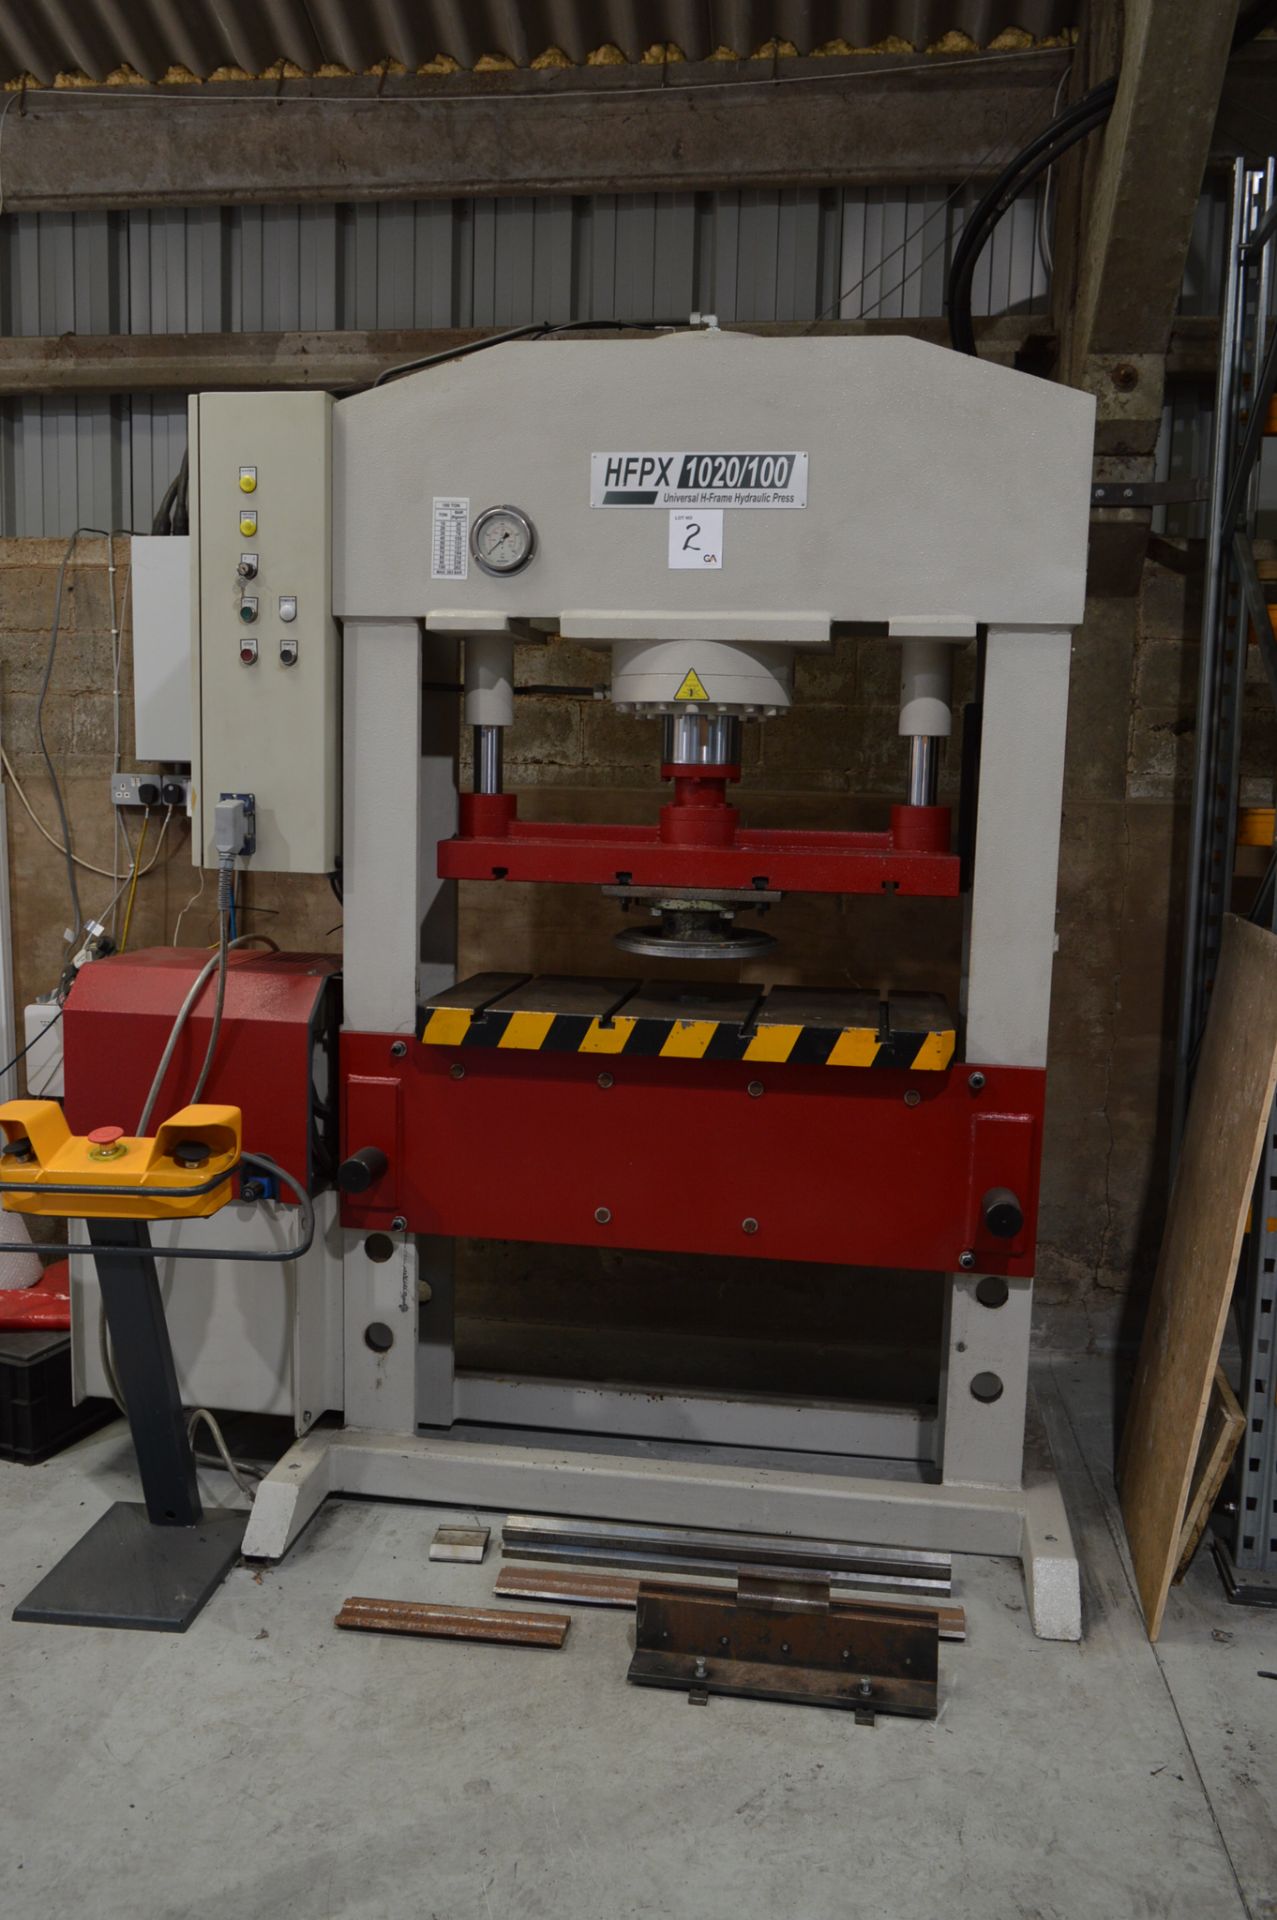 Morgan Rushworth HFPX 1020/100 universal H frame hydraulic press Distance between columns approx. - Image 2 of 7